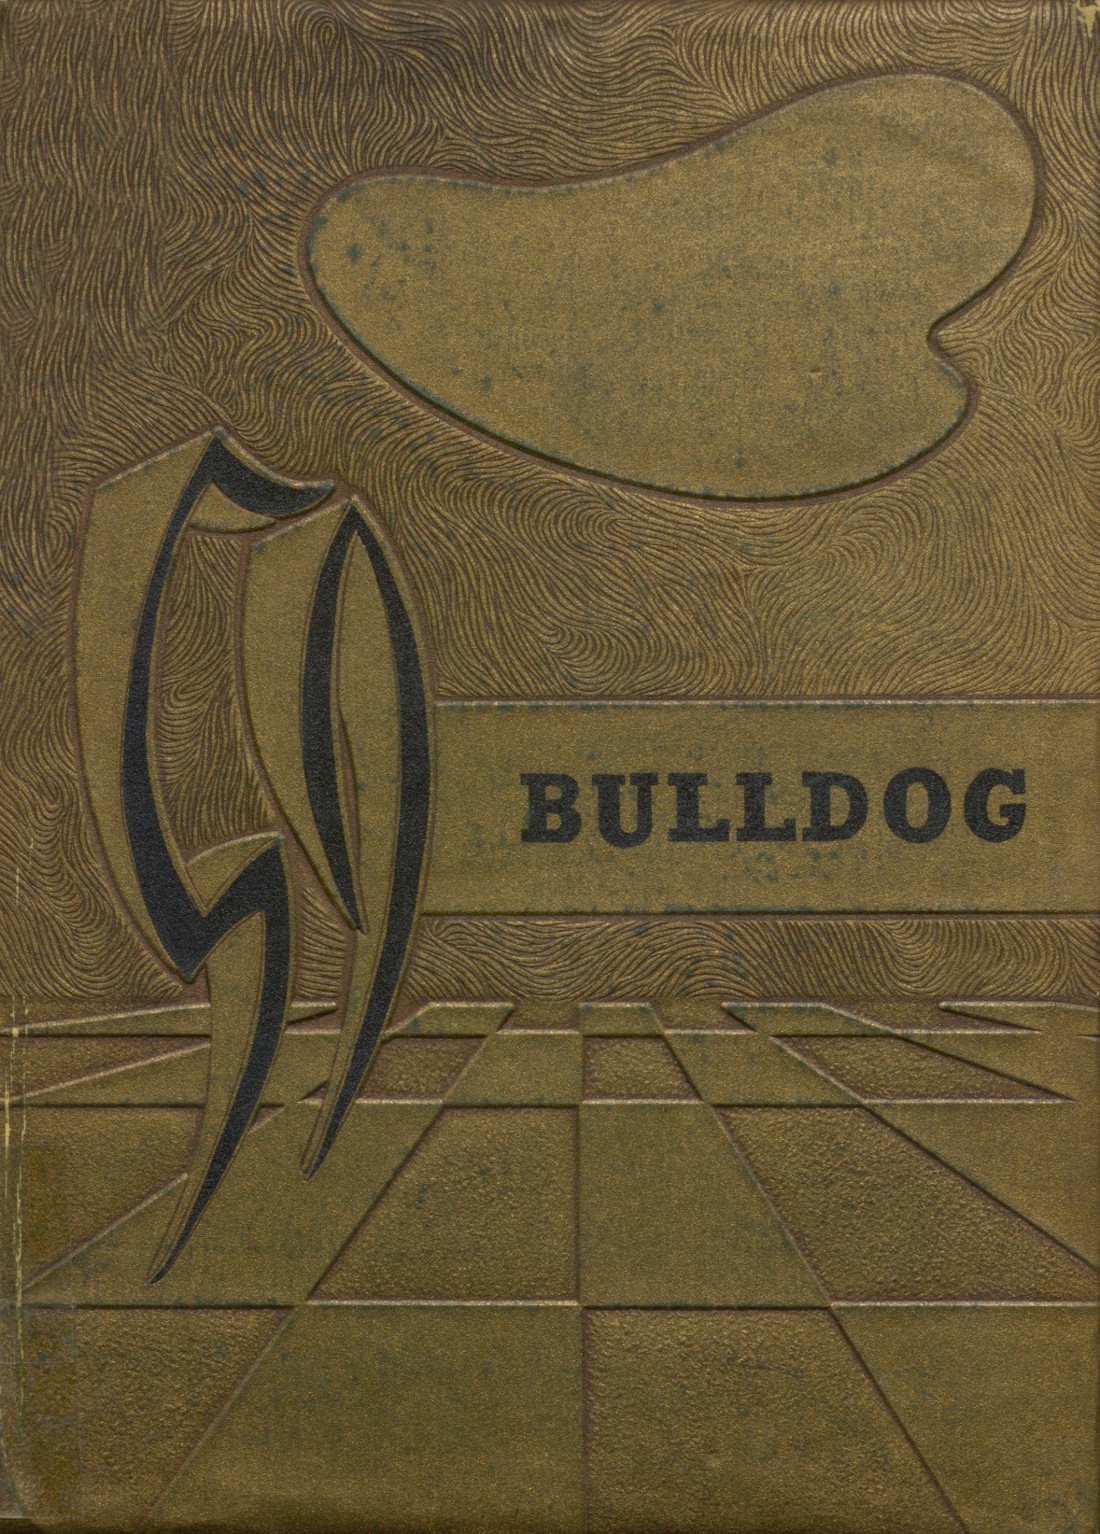 1959 yearbook from Brady High School from Brady, Texas for sale